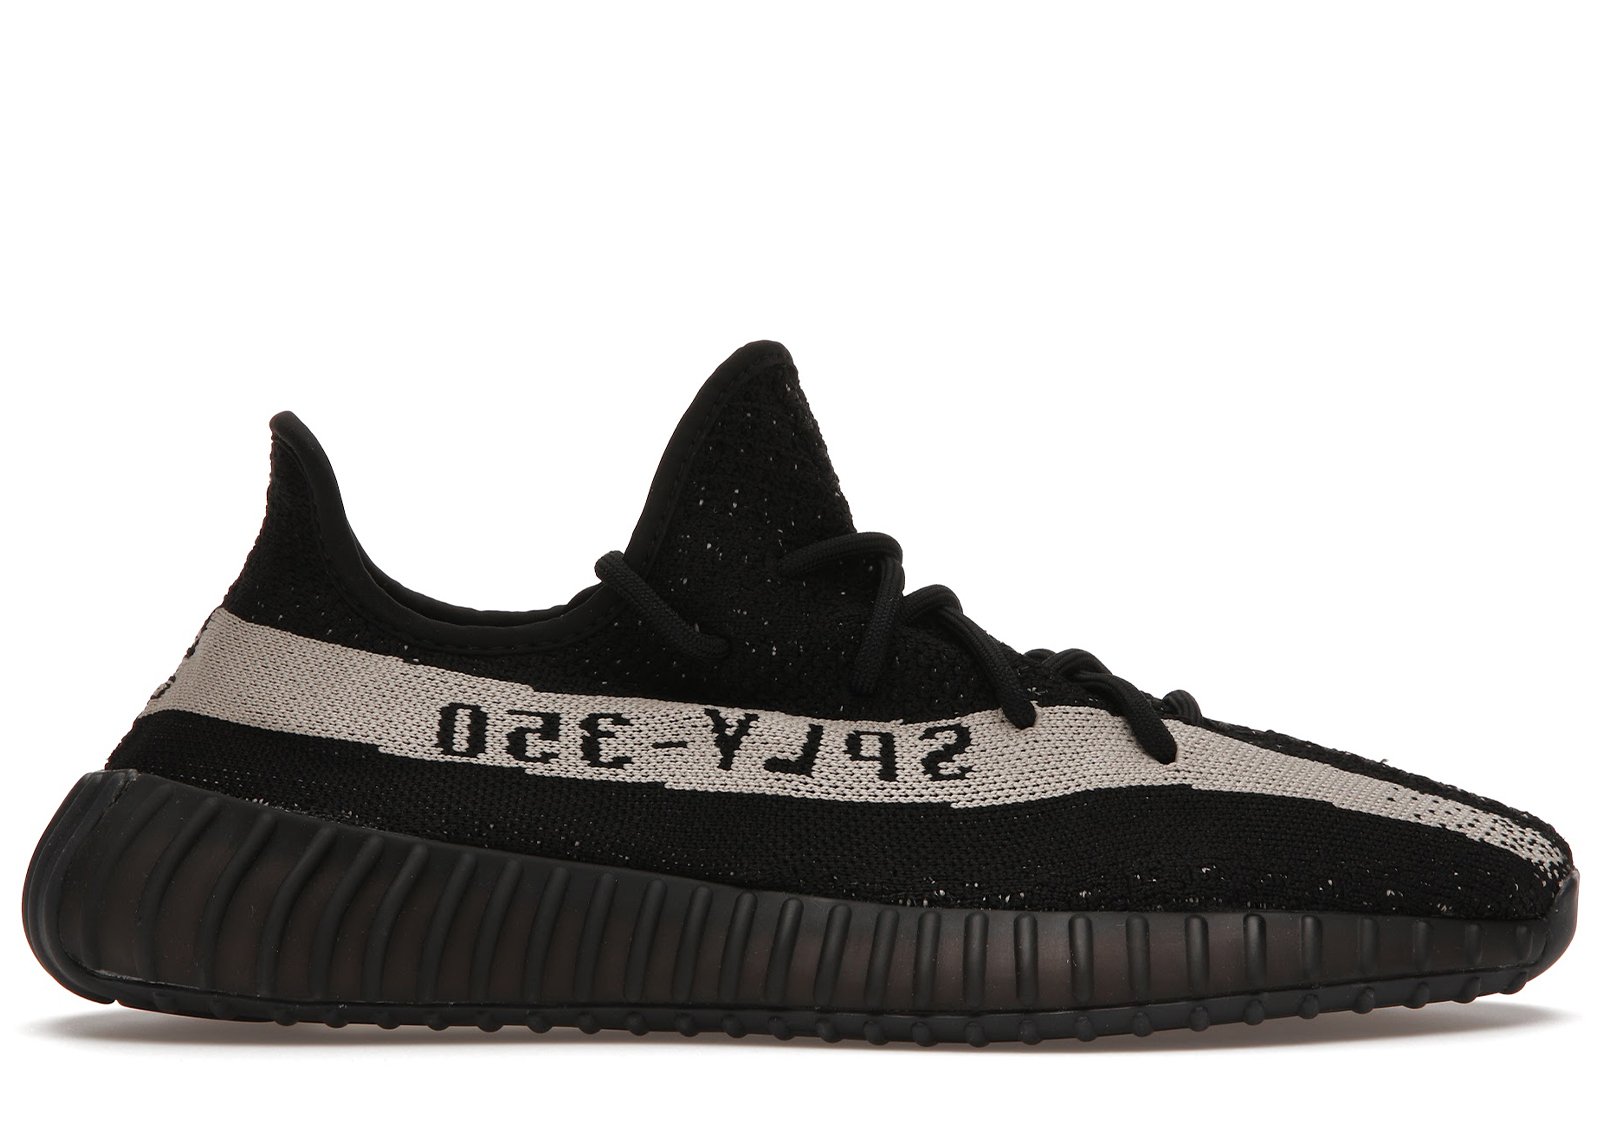 adidas Yeezy Boost 350 V2 Core Black White (2016/2022) sneakers